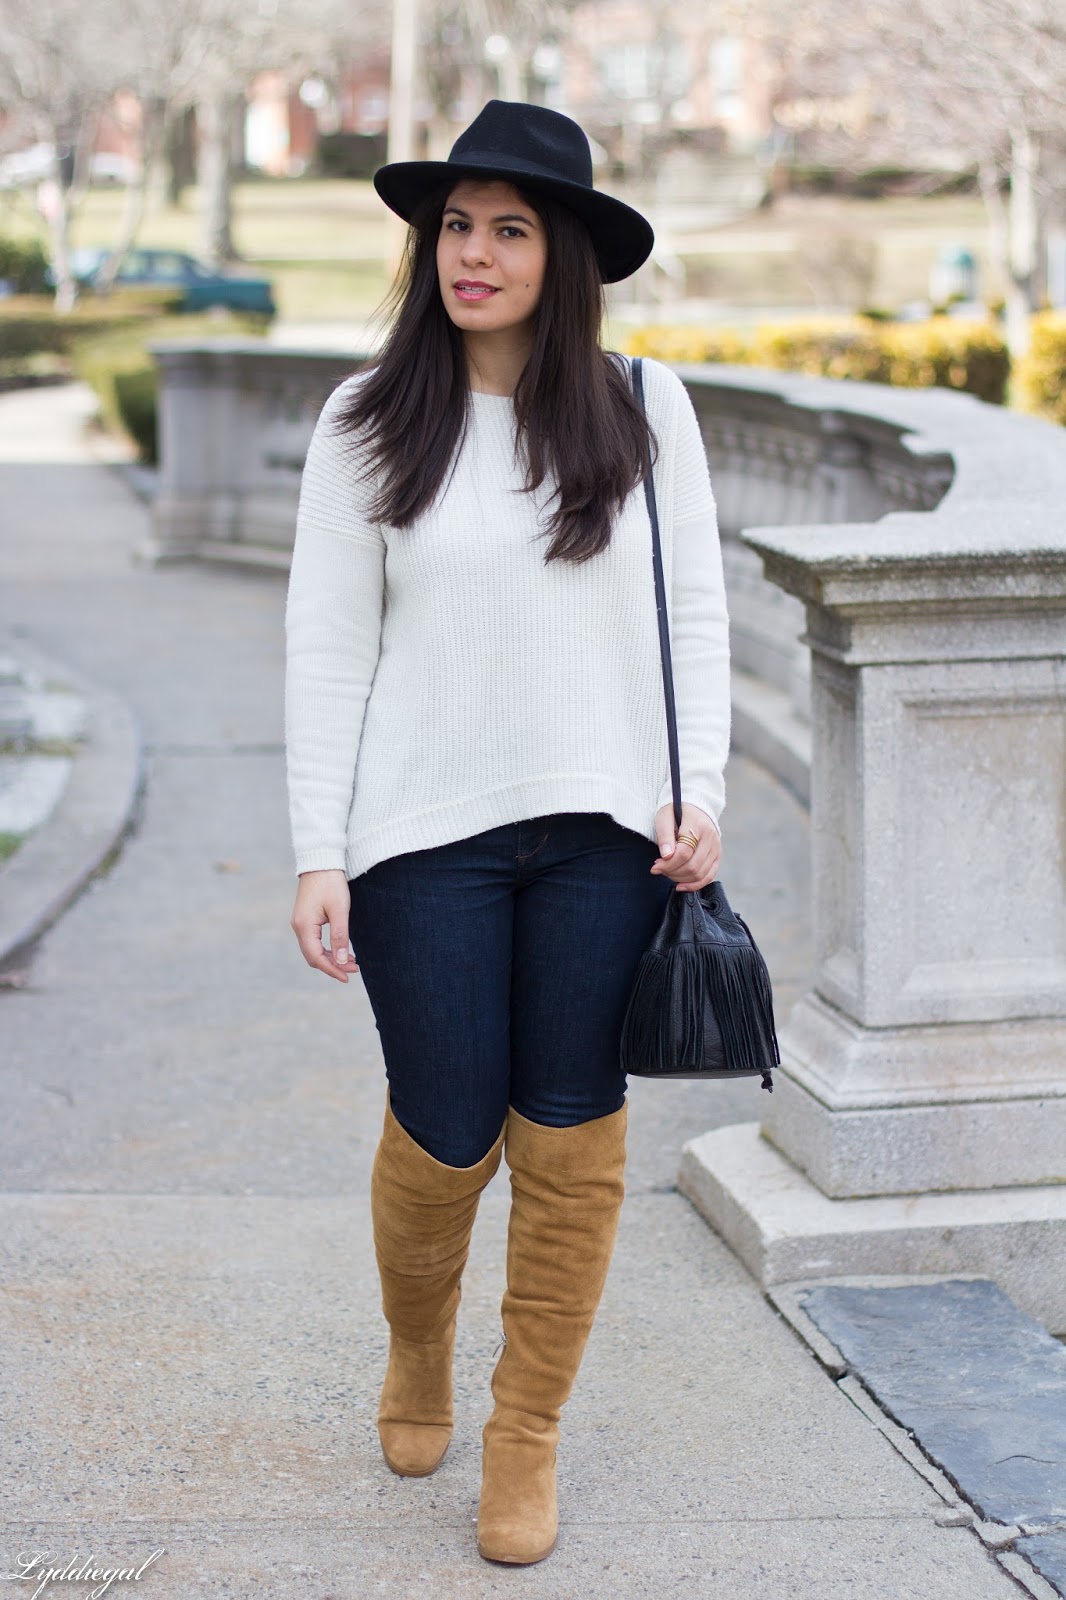 Mind Over Matter - Chic on the Cheap | Connecticut based style blogger ...